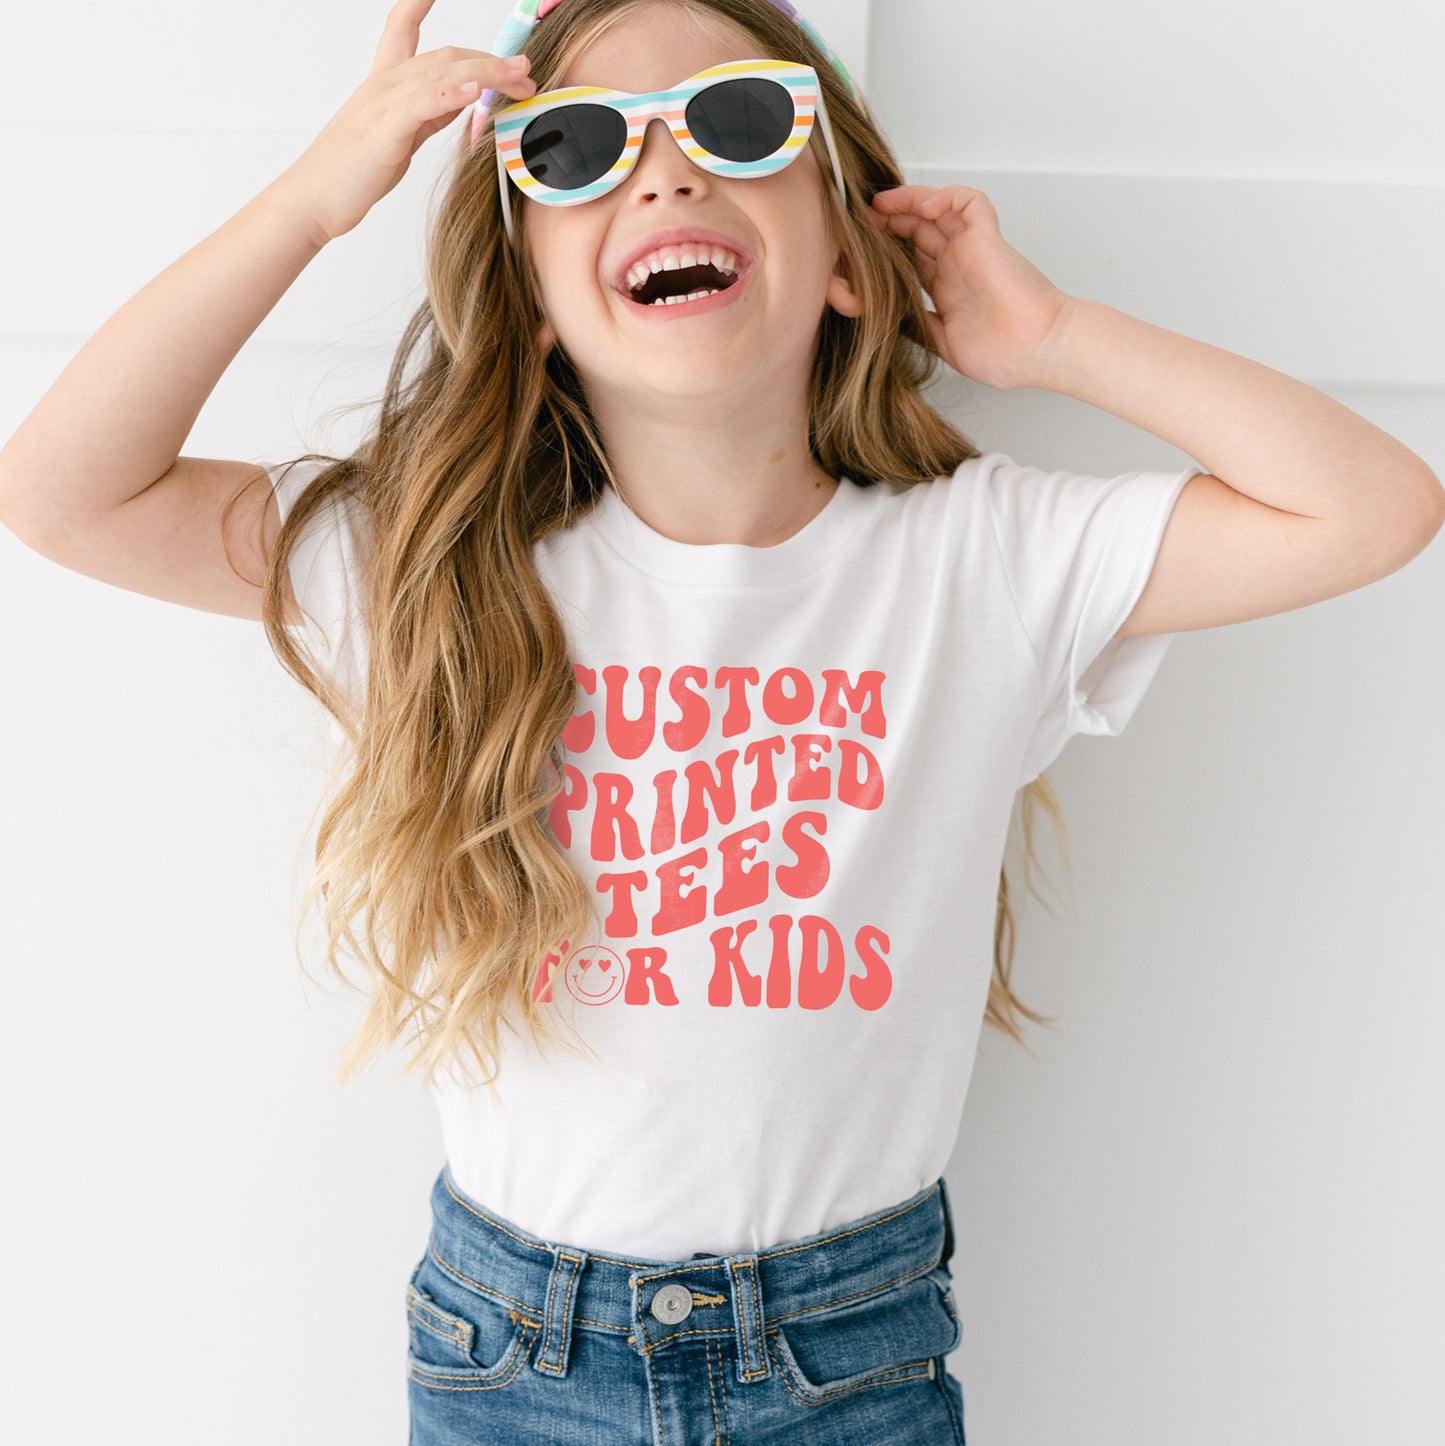 a cute smiling girl wearing sunglasses and a white t-shirt that reads "custom printed tees for kids"